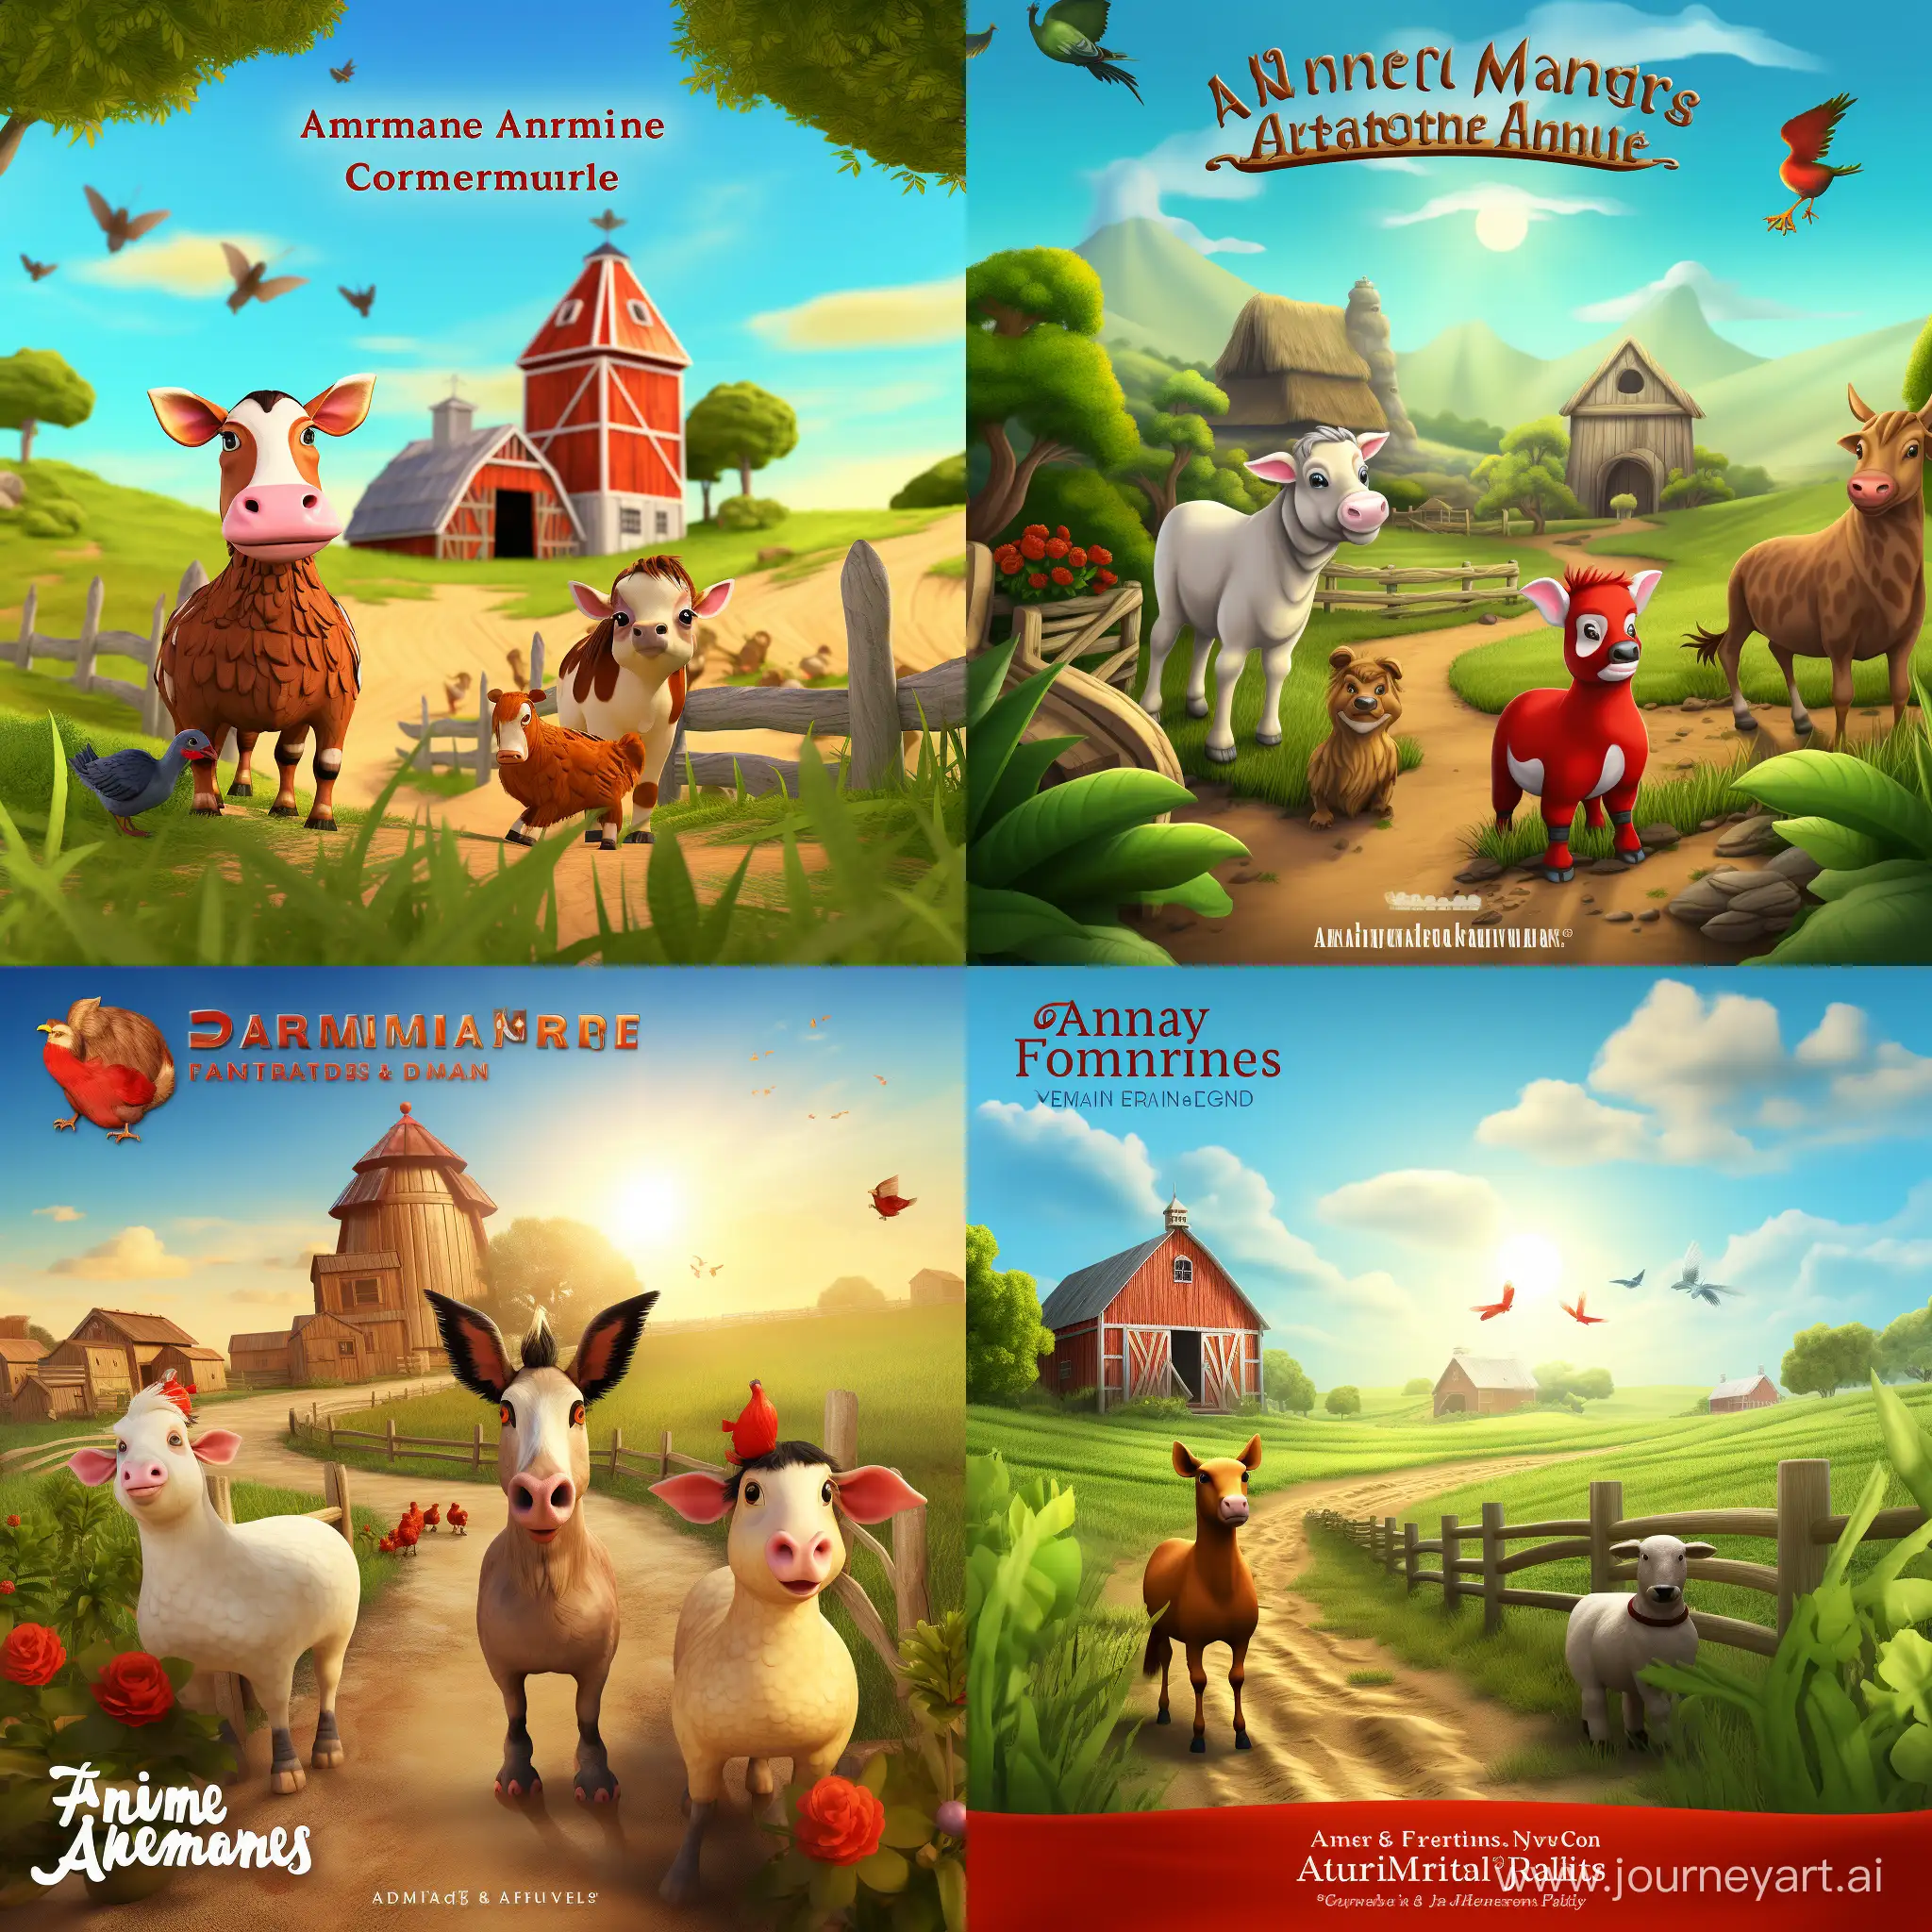 Title: "Farm Adventures: A Captivating 3D Journey"

Picture Prompt:
[Image: An animated farm scene with diverse animals collaborating and celebrating their triumphs in a lush, vibrant environment.]

Shortened Text:

Embark on a captivating 3D journey into the lively world of the farm. Witness the power of unity and collaboration as the animals overcome challenges and celebrate their victories. Experience stunning 3D animation that brings the farm to life, capturing the essence of nature and the delightful expressions of the animal characters. Celebrate the universal themes of friendship, bravery, and the joy of embracing one's true nature.

[Picture: A close-up of the animal characters, showcasing their expressions and personalities, surrounded by the beauty of the farm environment.]